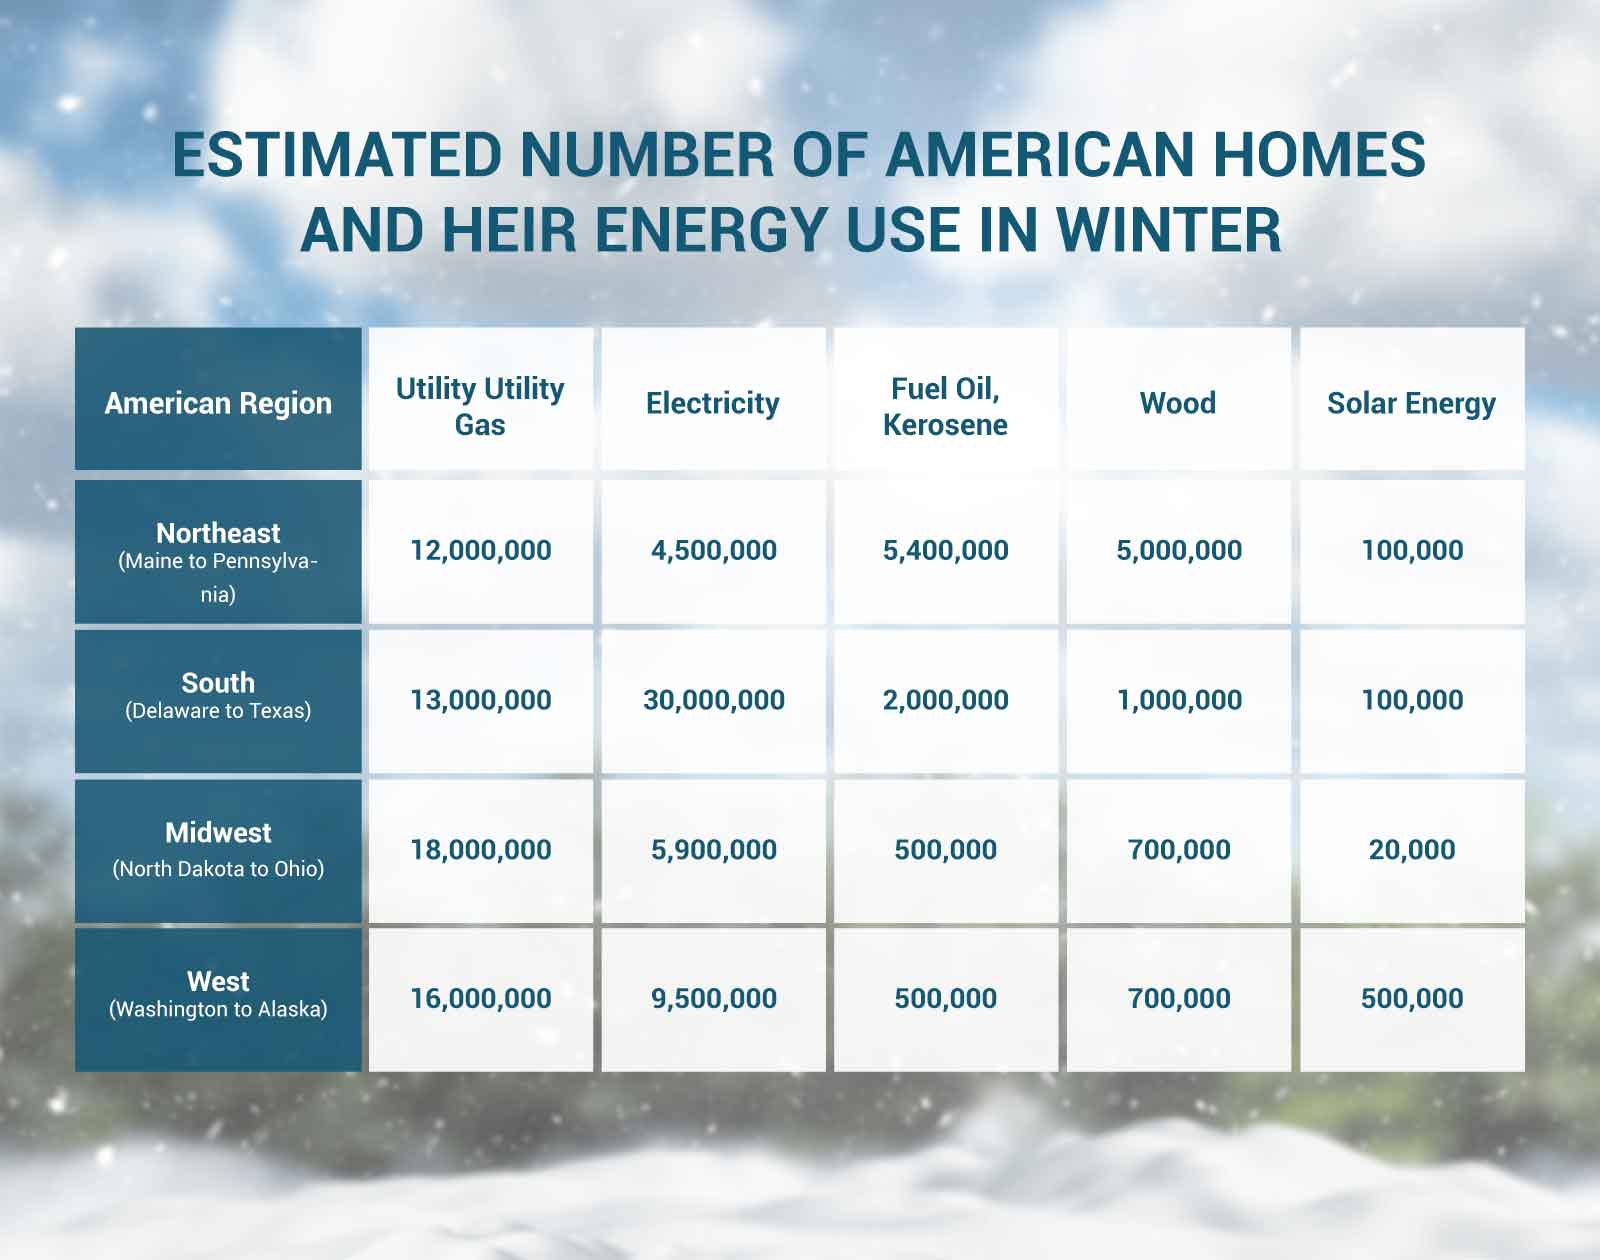 Table of Estimated Number of American Homes and Their Energy Use in Winter